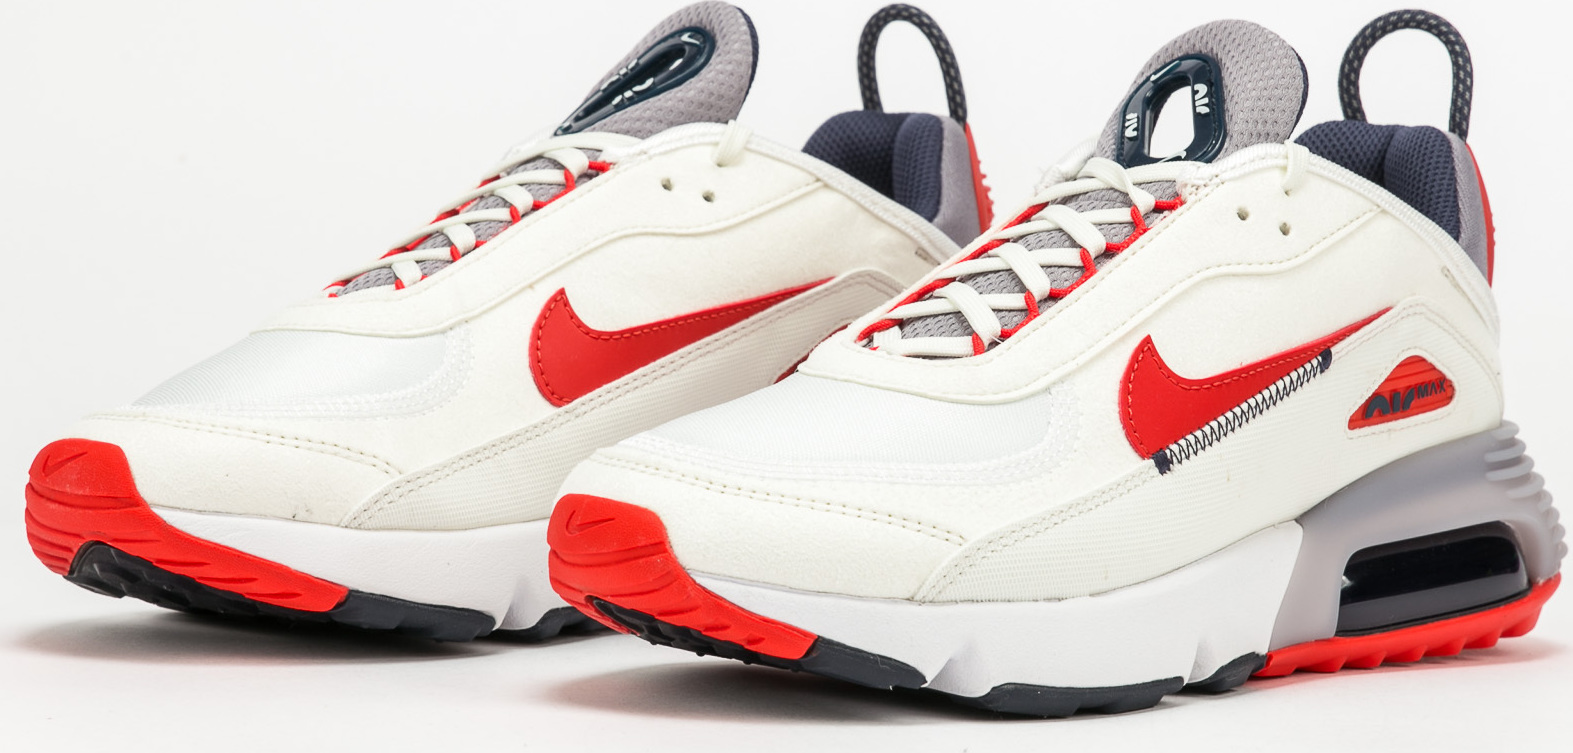 Nike Air Max 2090 C/S summit white / chile red Nike